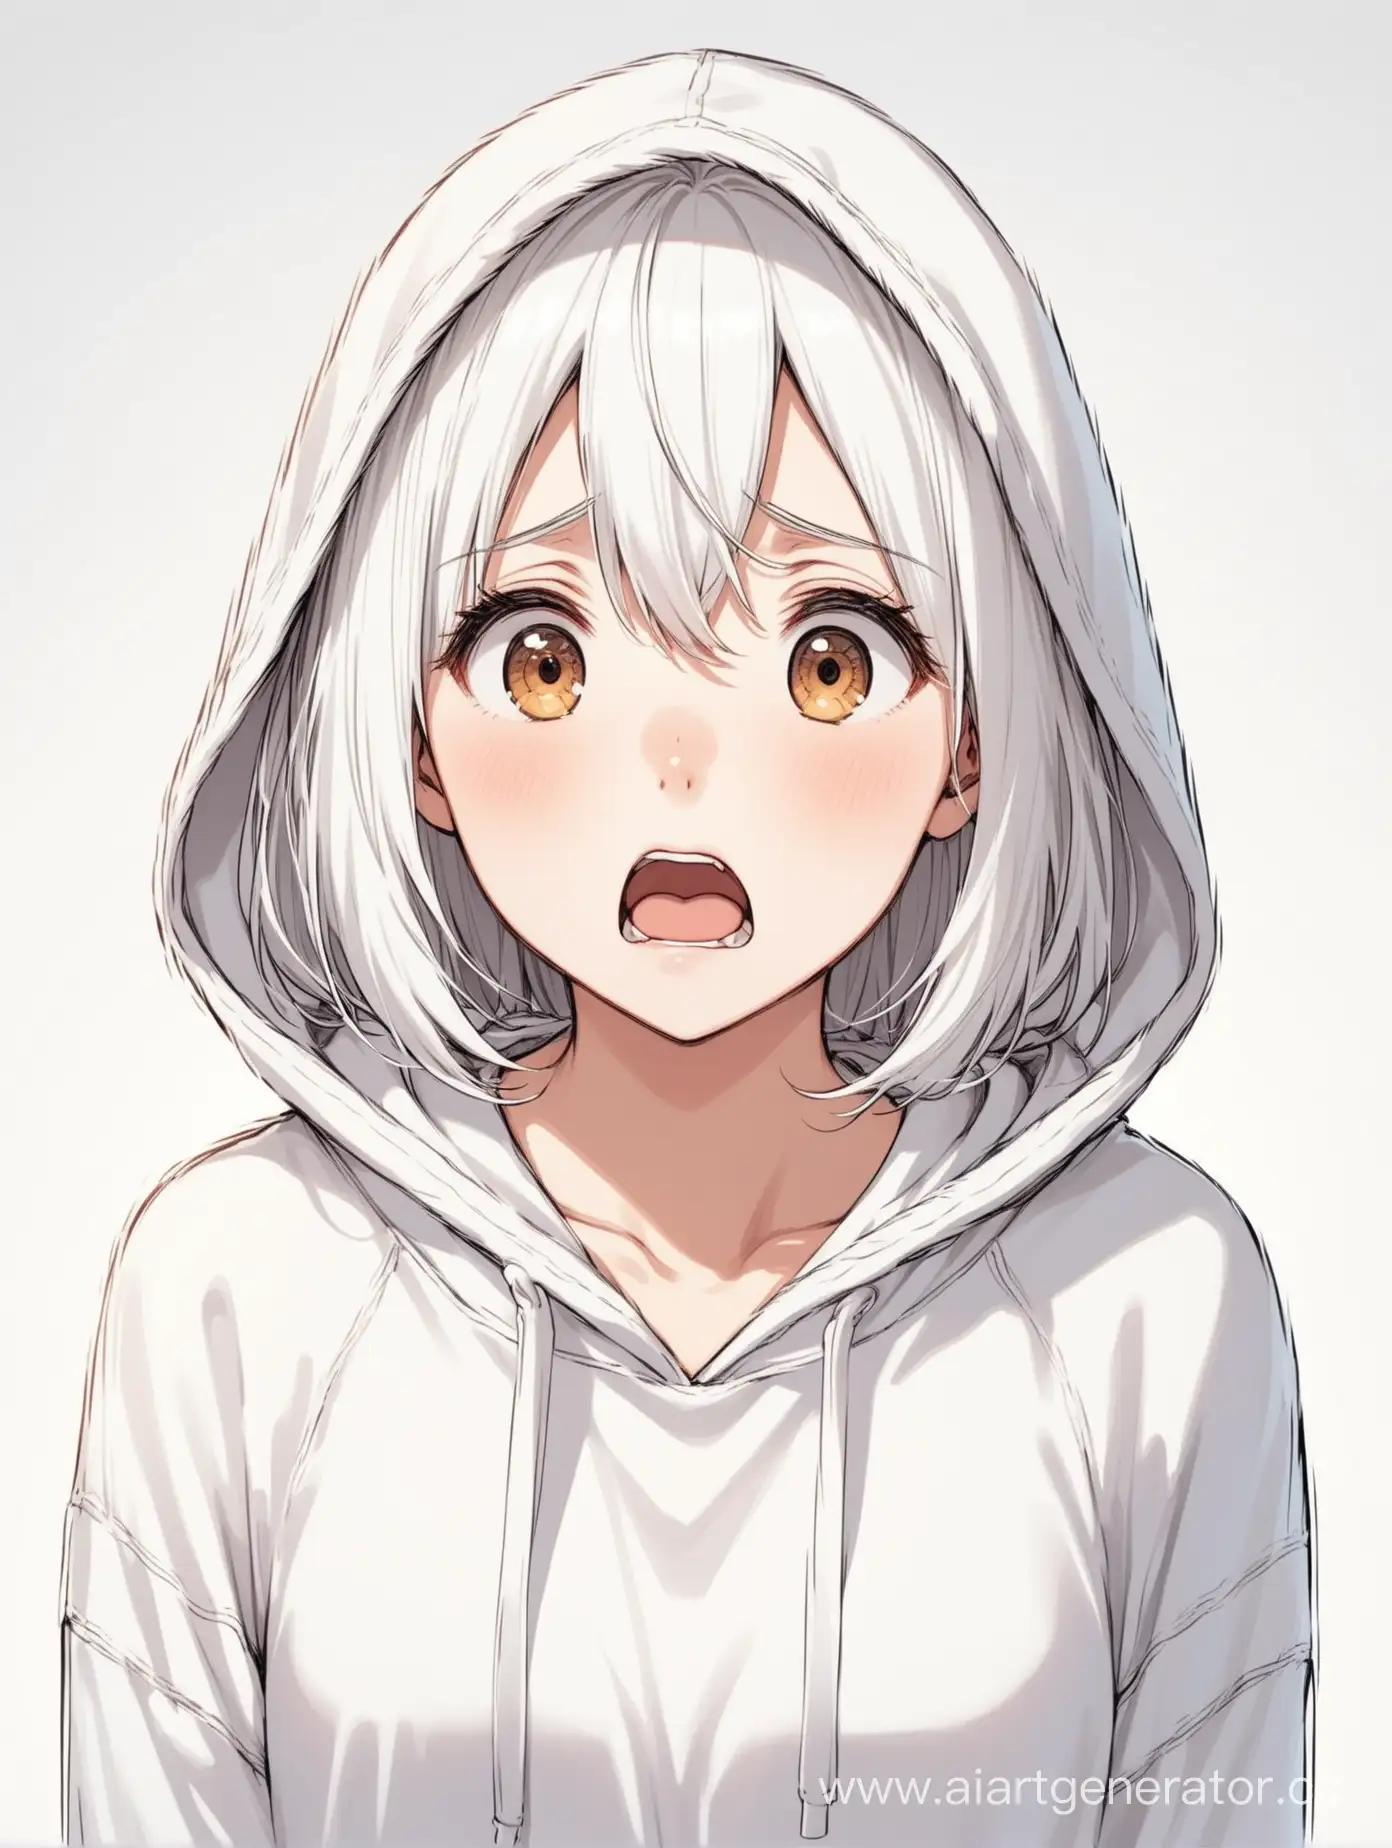 Surprised-WhiteHaired-Girl-in-Hoodie-on-White-Background